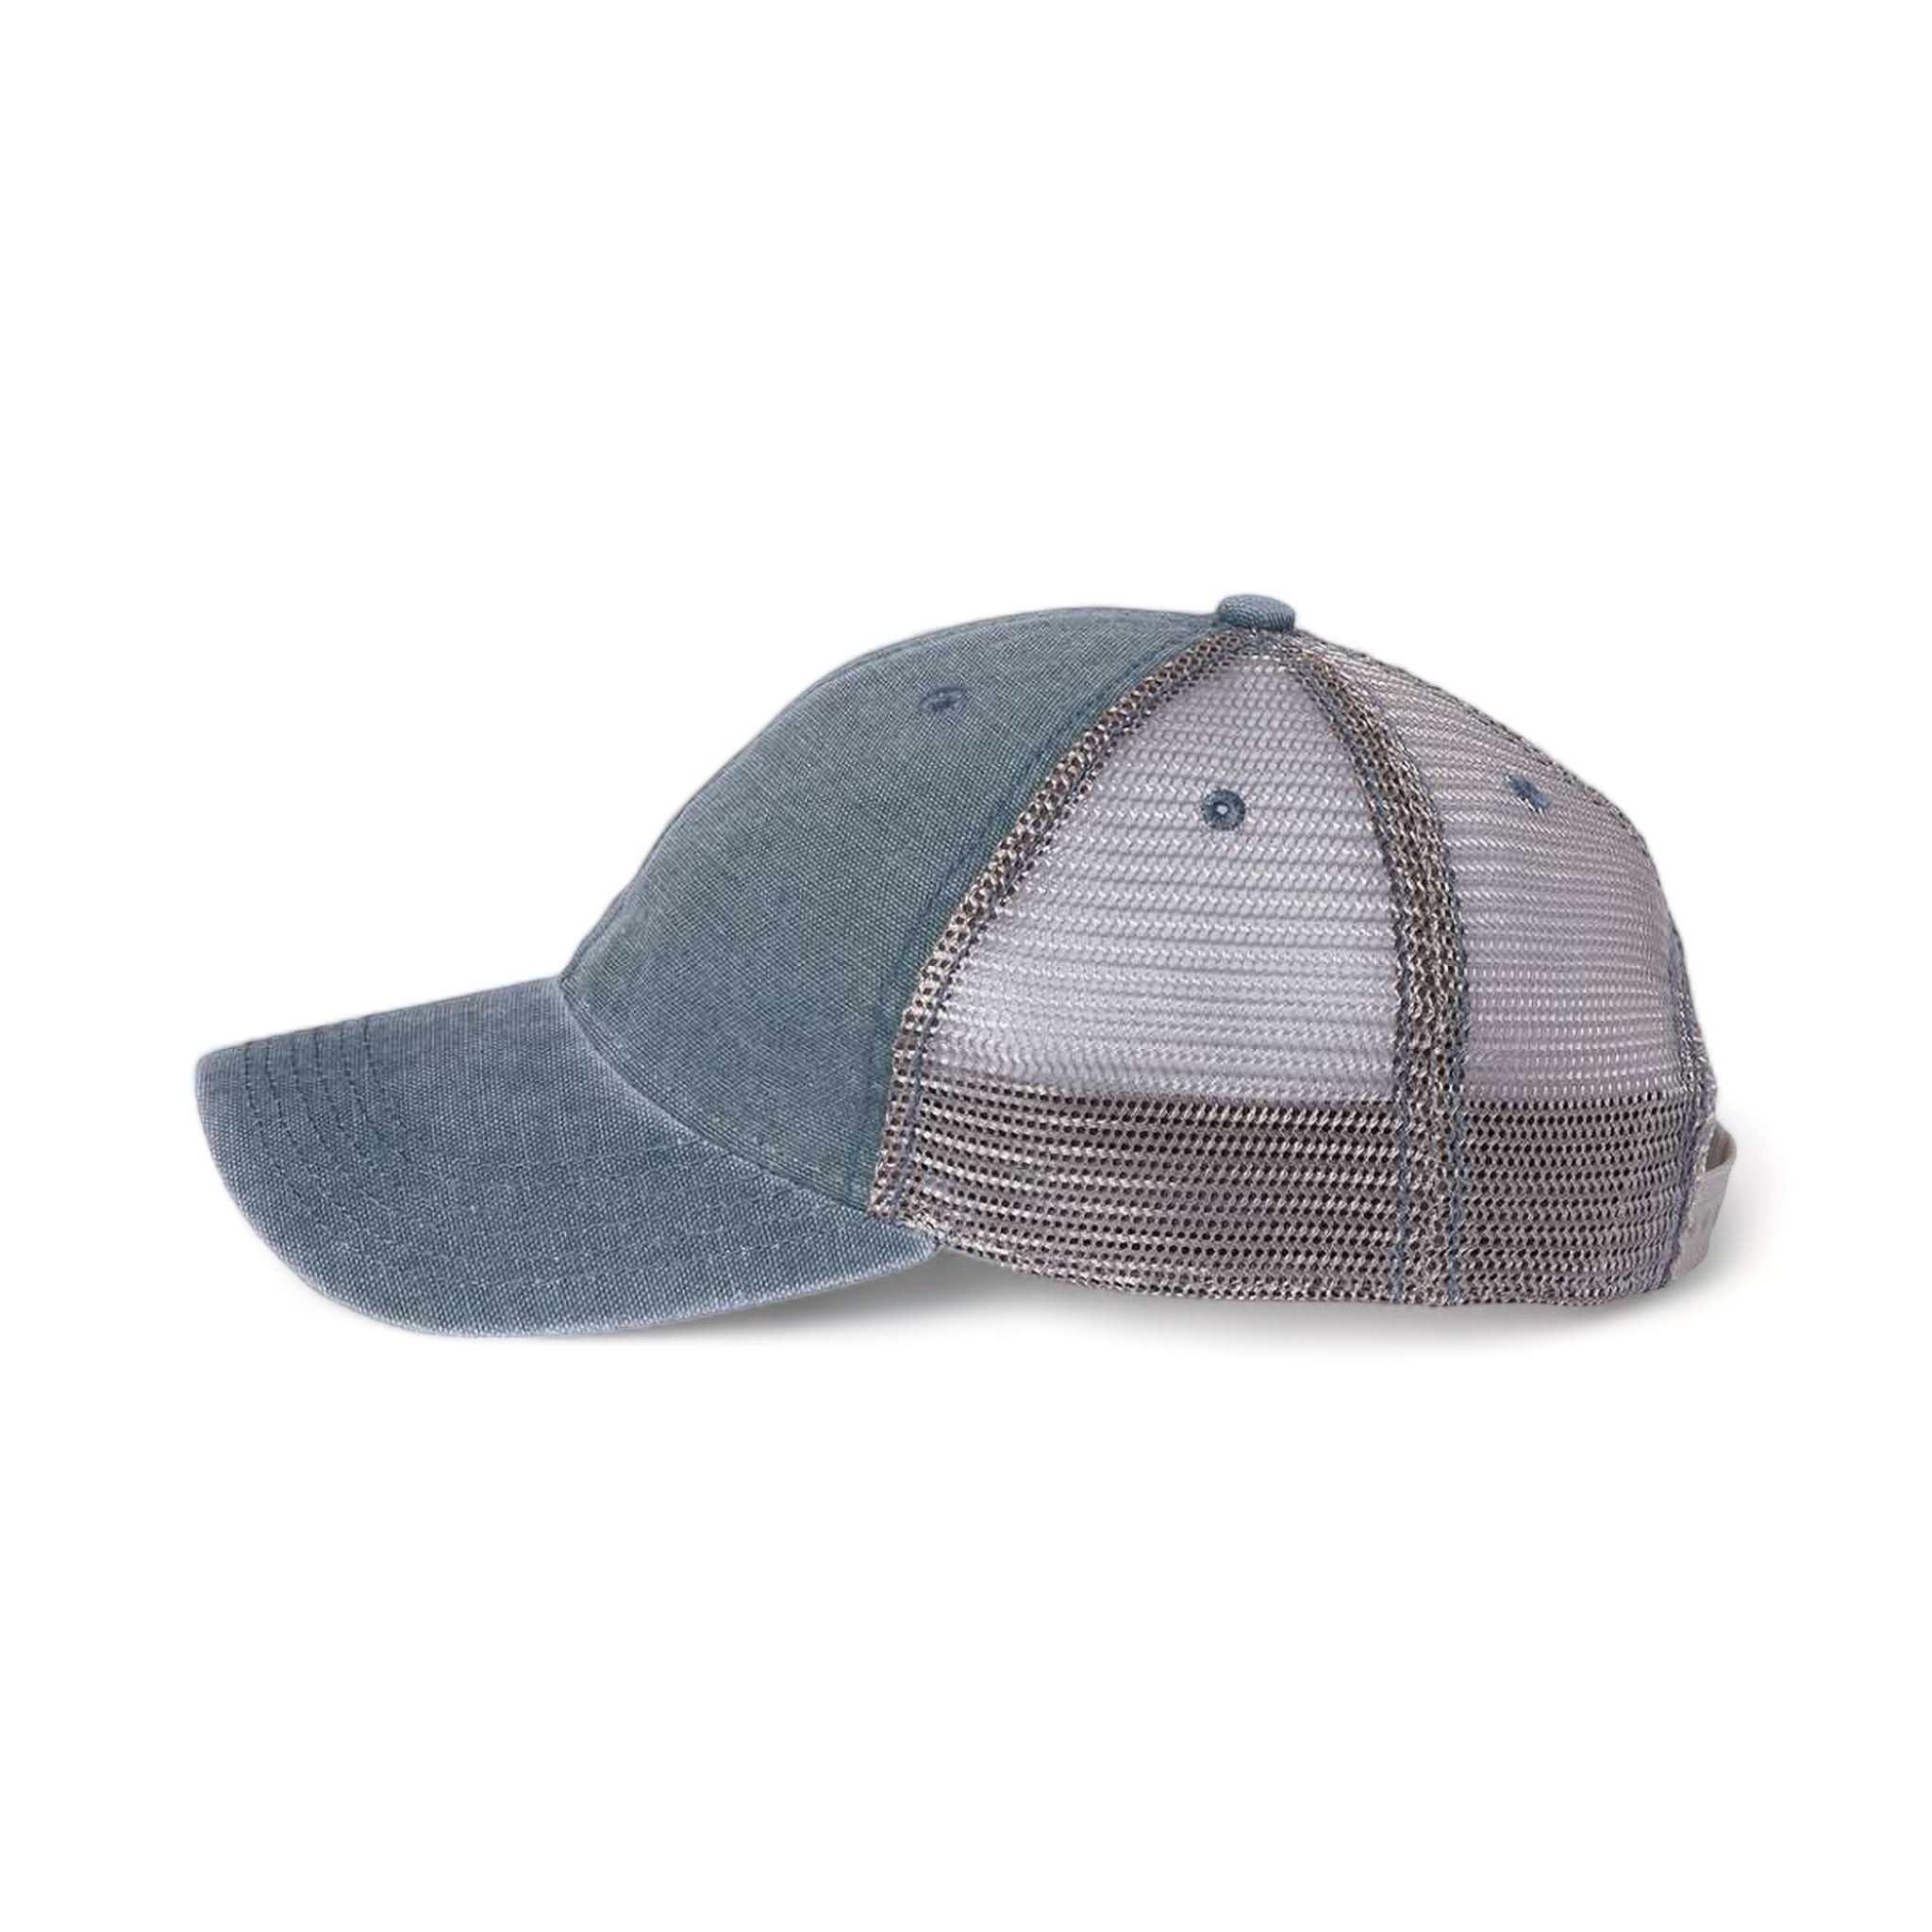 Side view of LEGACY DTA custom hat in blue steel and grey